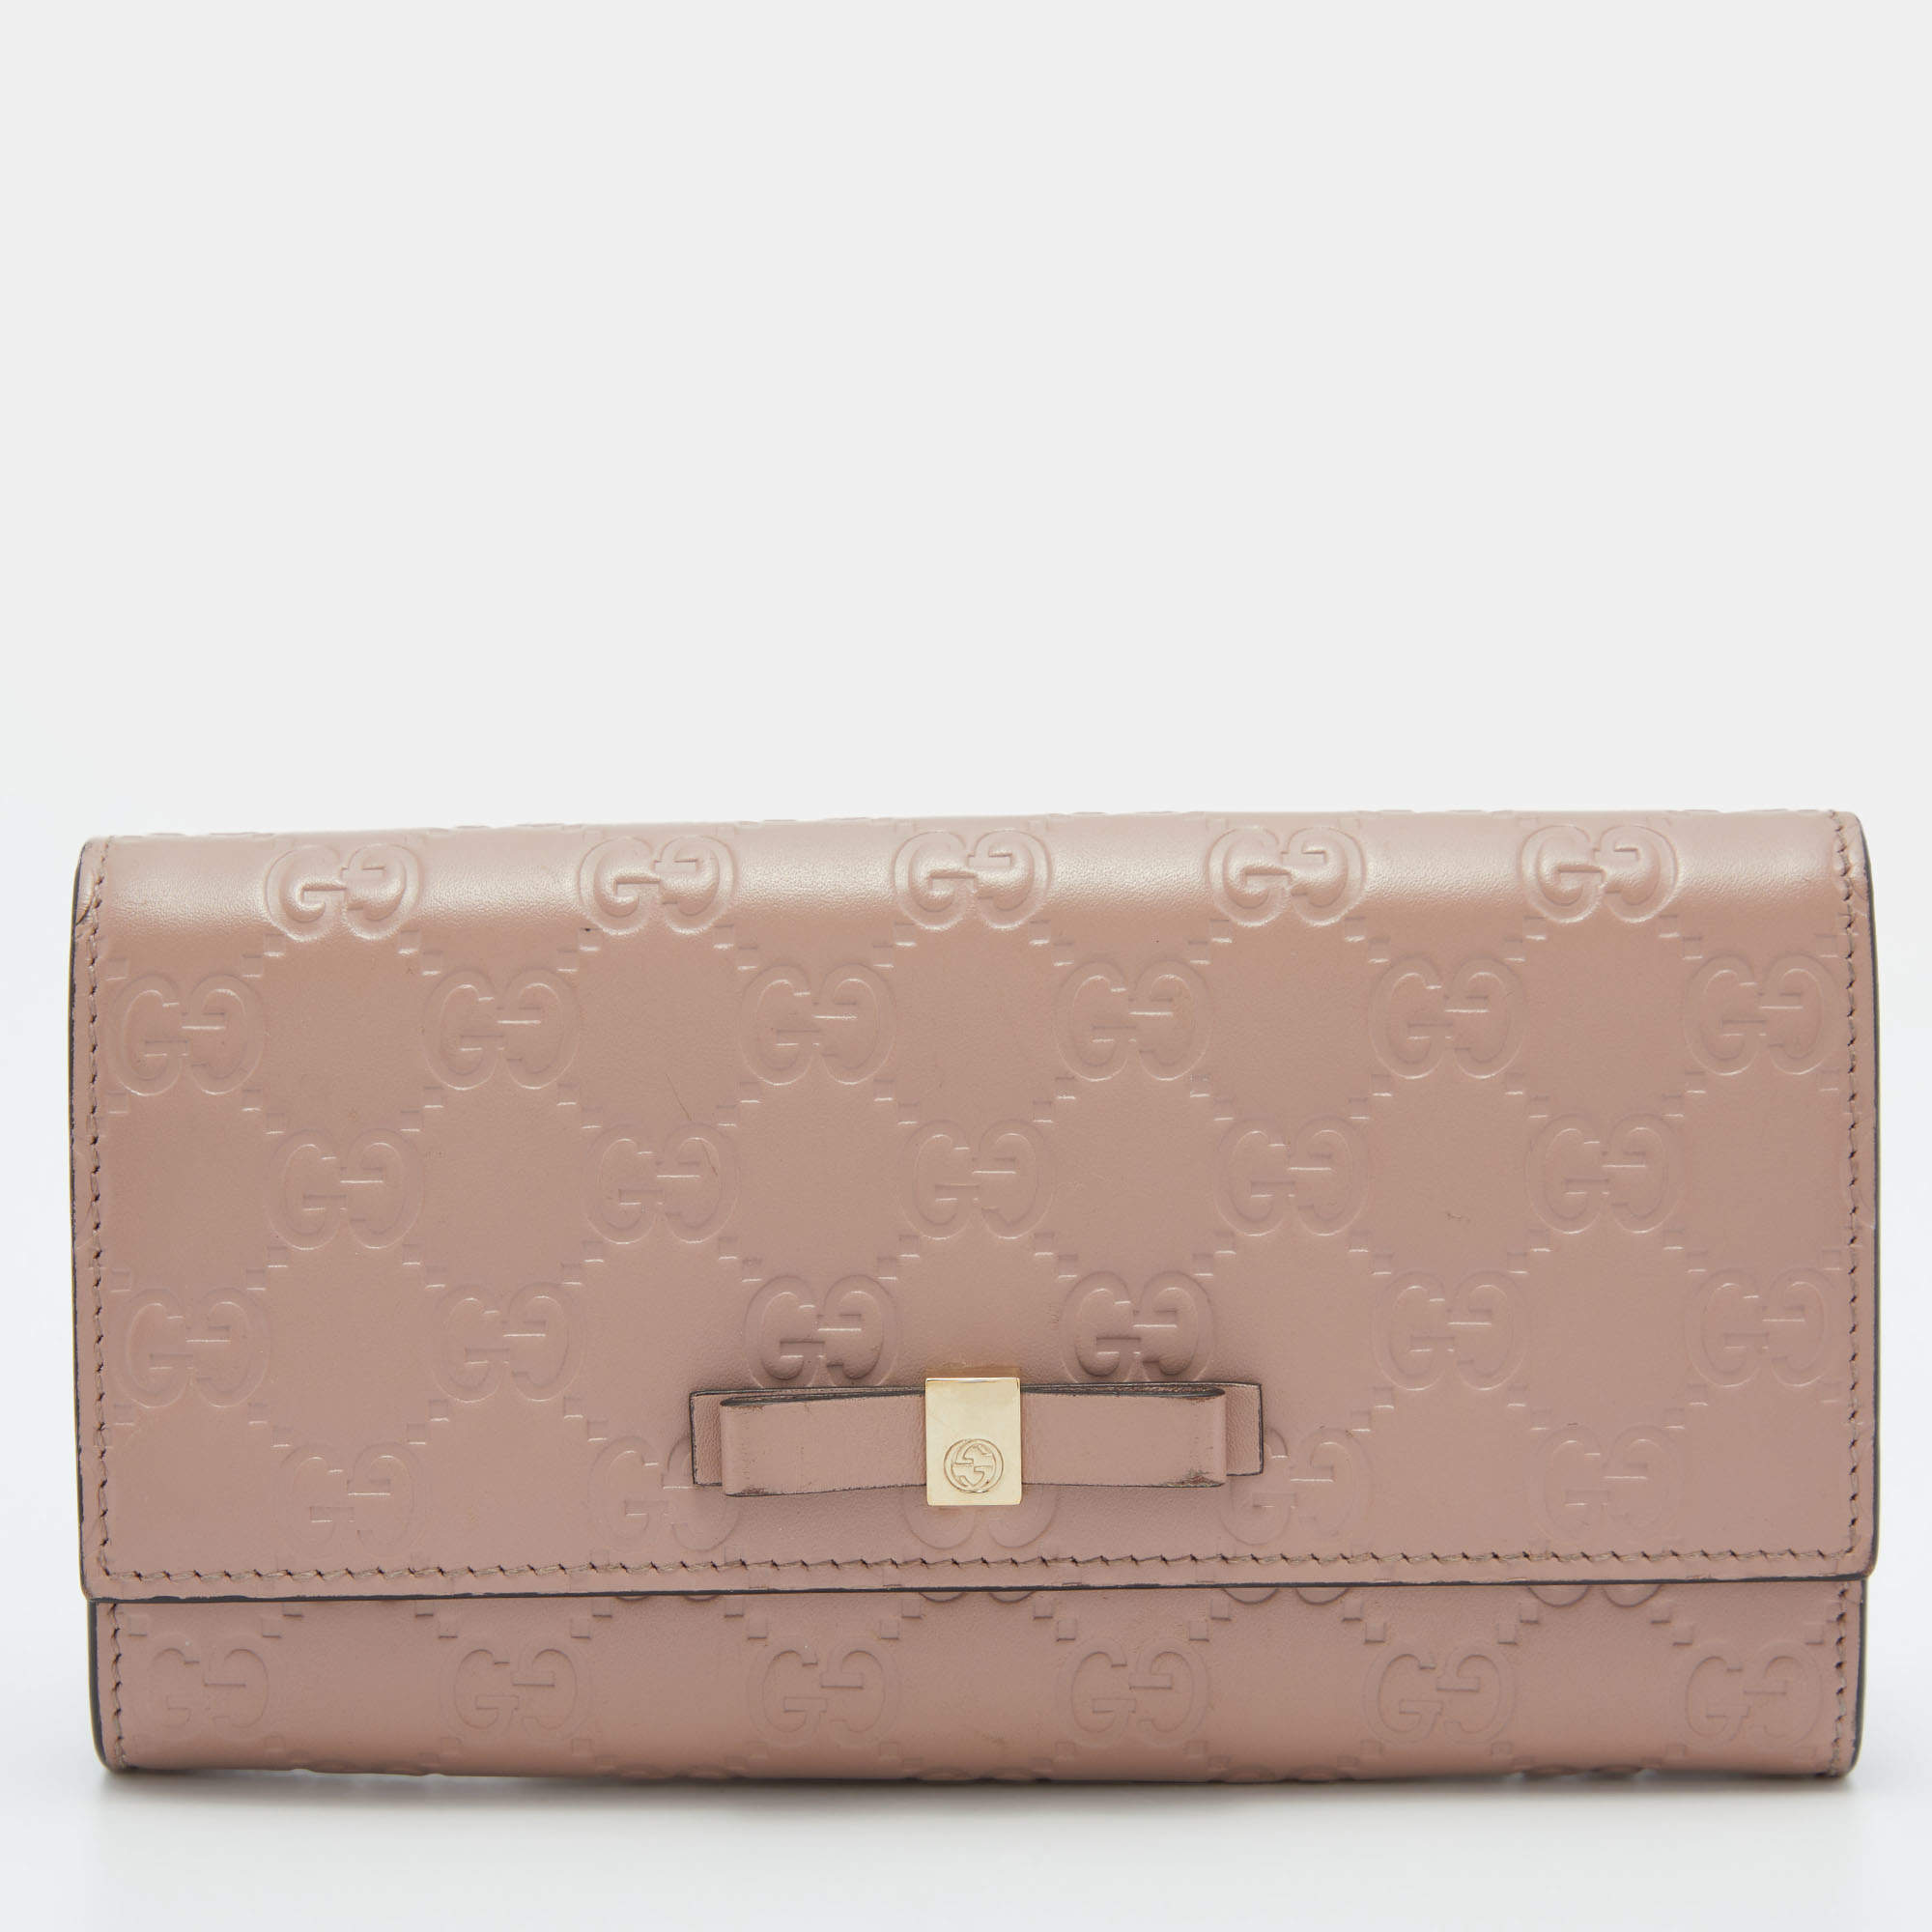 Gucci Pink Guccissima Leather Mayfair Bow Continental Flap Wallet